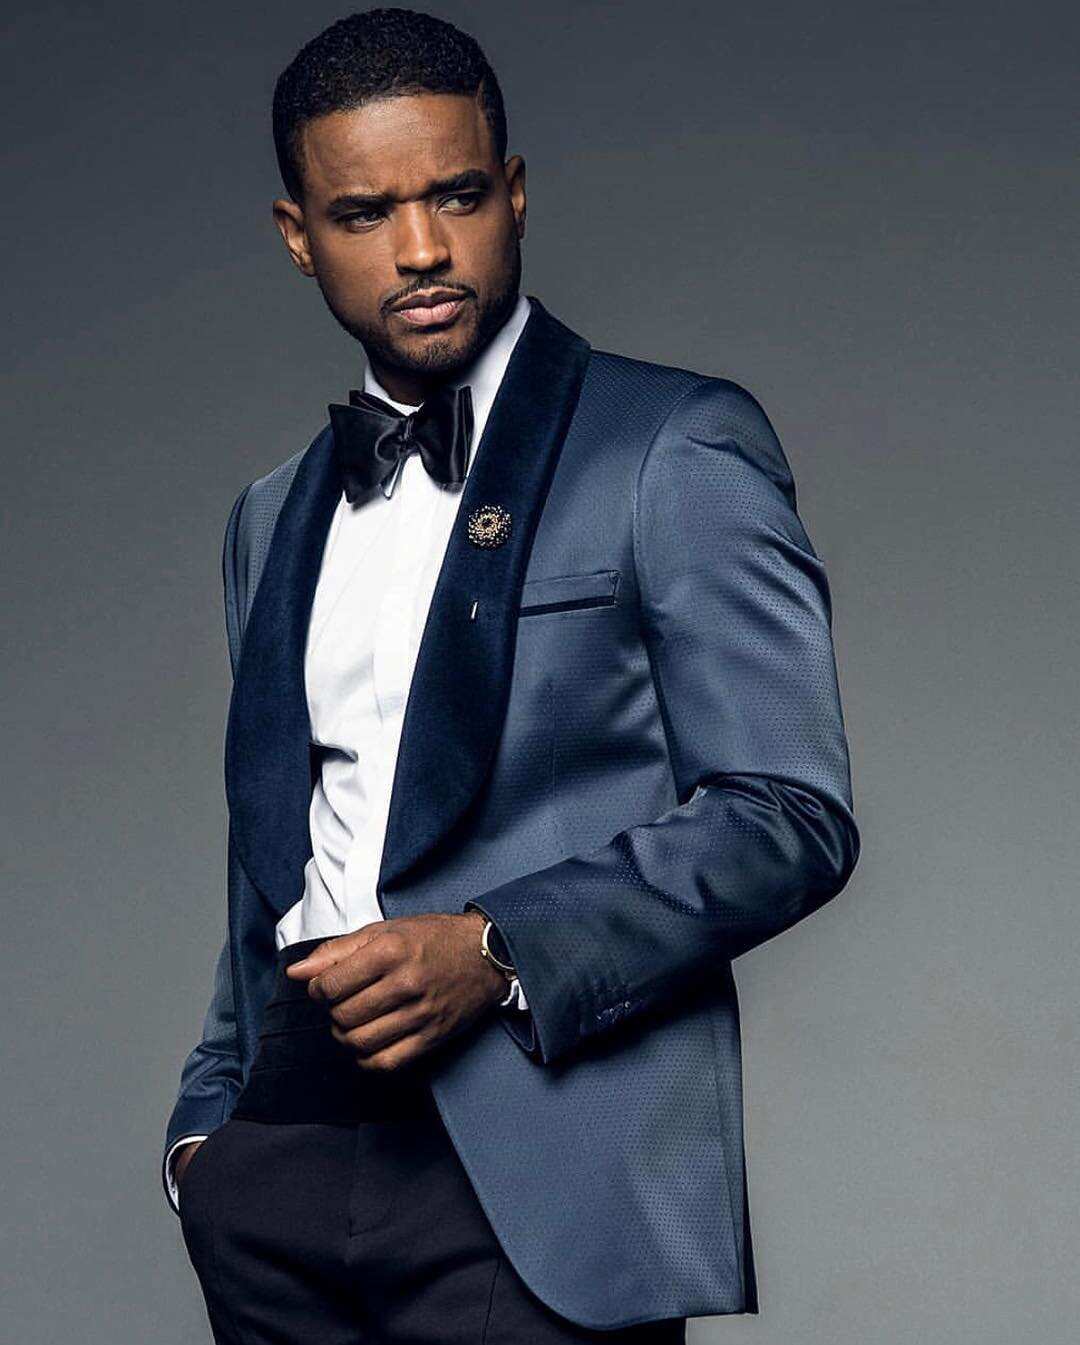 Actor Larenz Tate bio age, height, net worth, brothers, wife Legit.ng